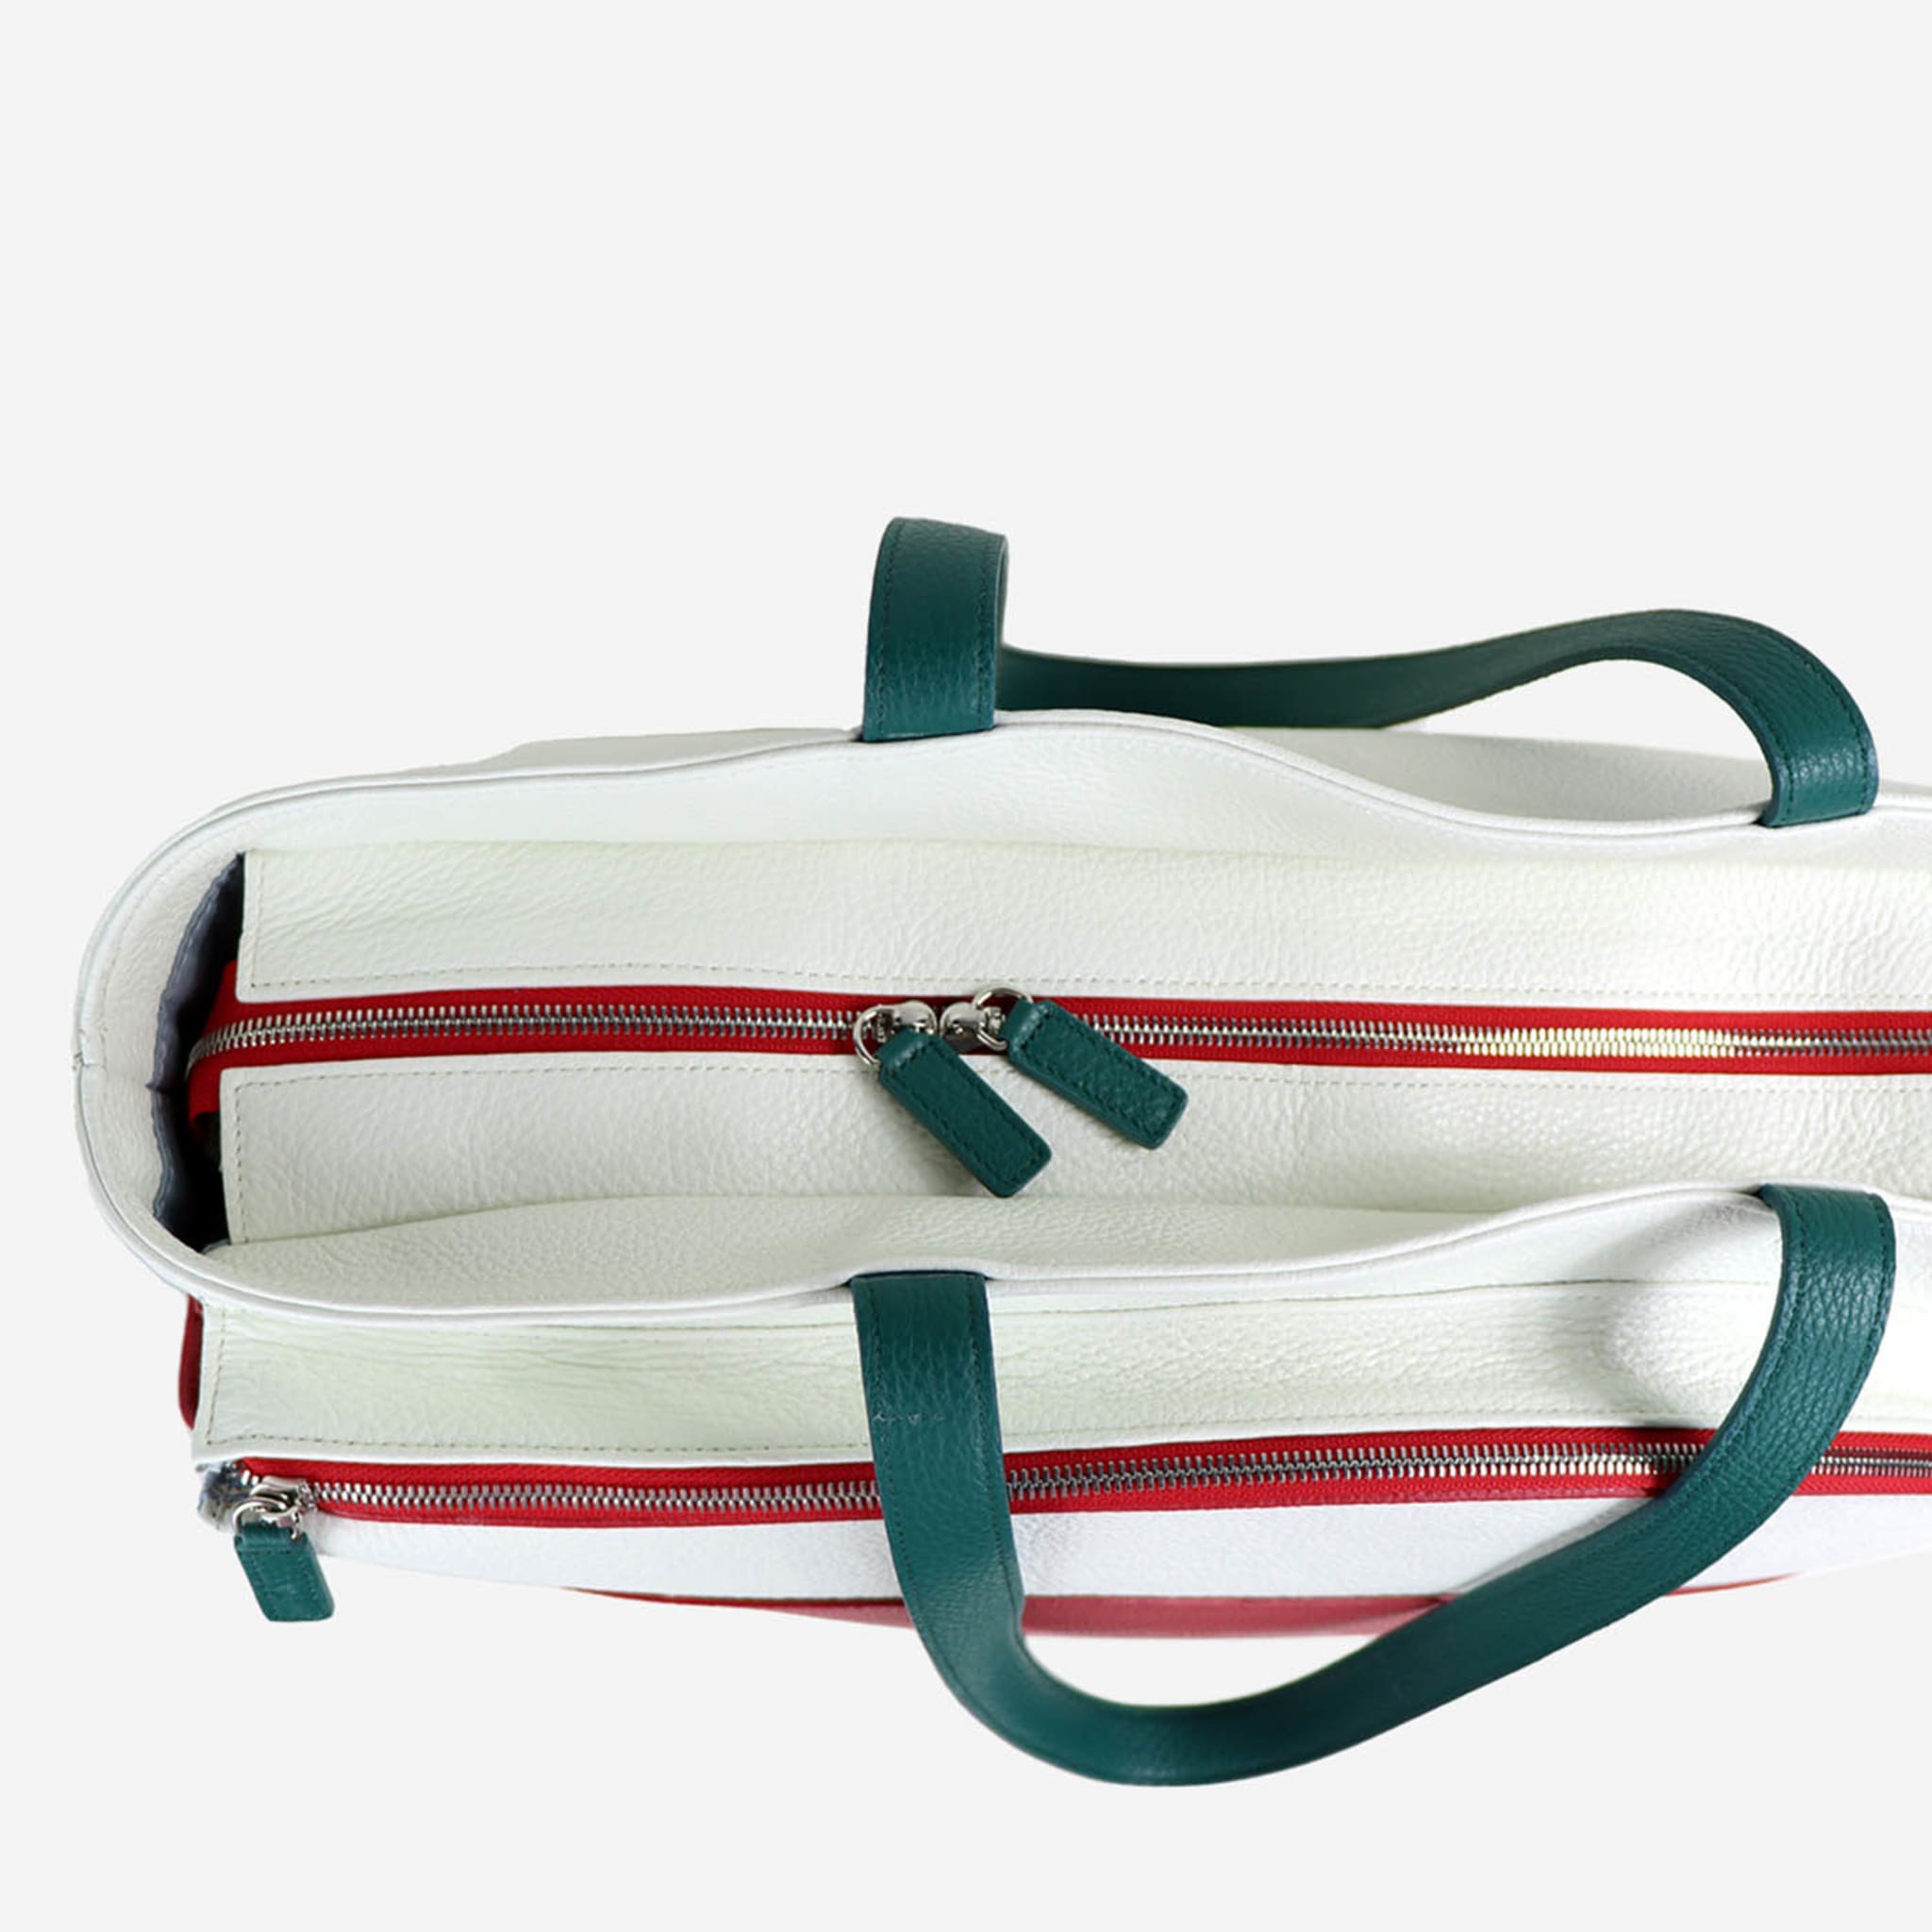 Sport White & Red Bag with Tennis-Racket-Shaped Pocket - Alternative view 1